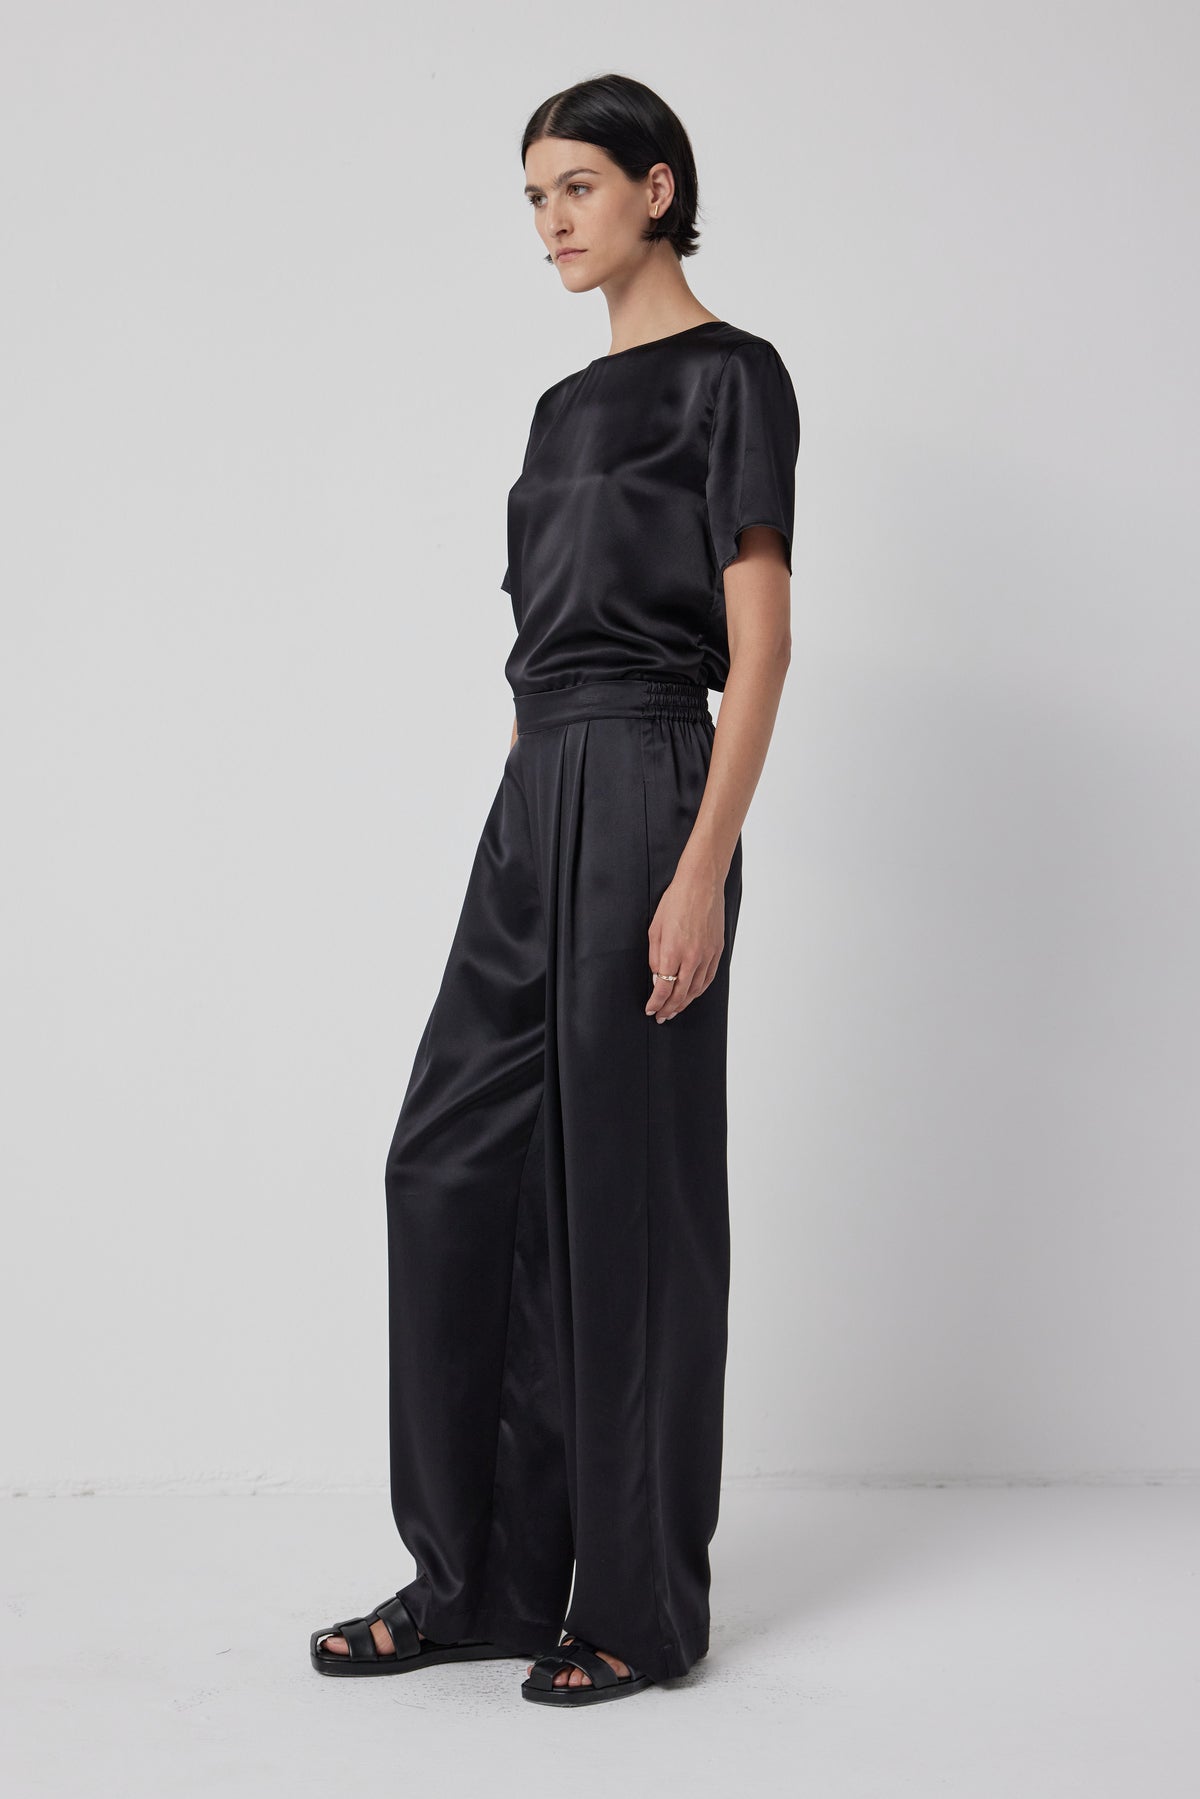 A woman stands in profile wearing a Velvet by Jenny Graham Pasadena Top and wide-leg trousers, paired with black sandals, against a plain background.-36463793799361